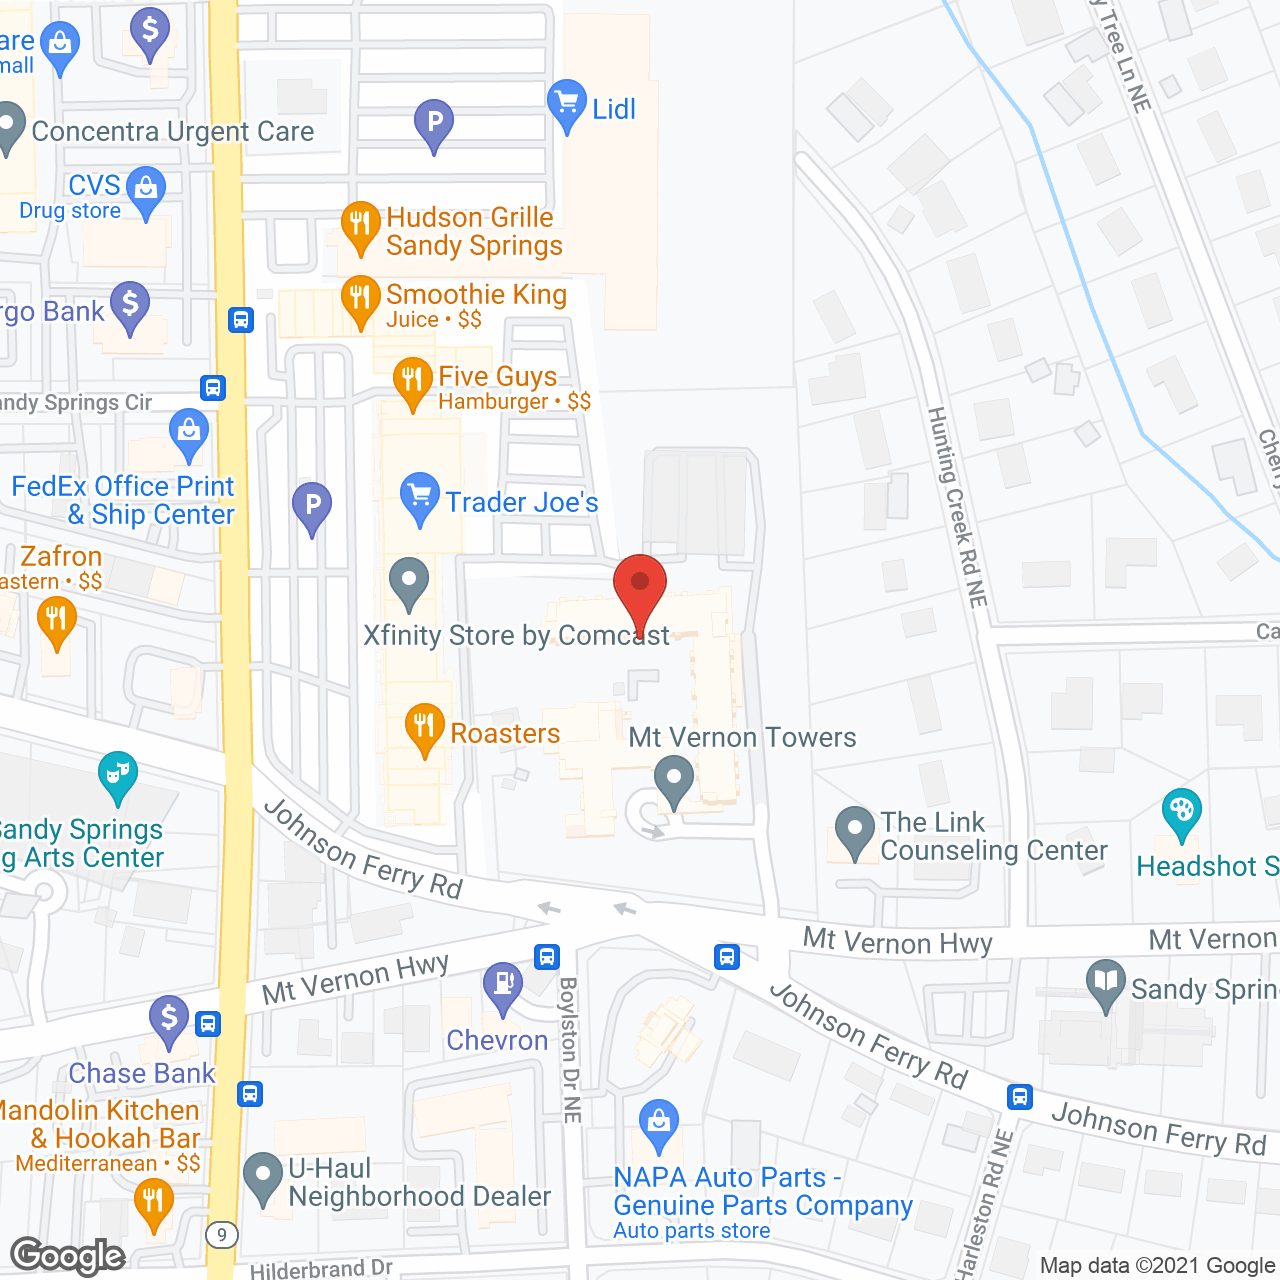 Mount Vernon Towers Personal Care Center in google map